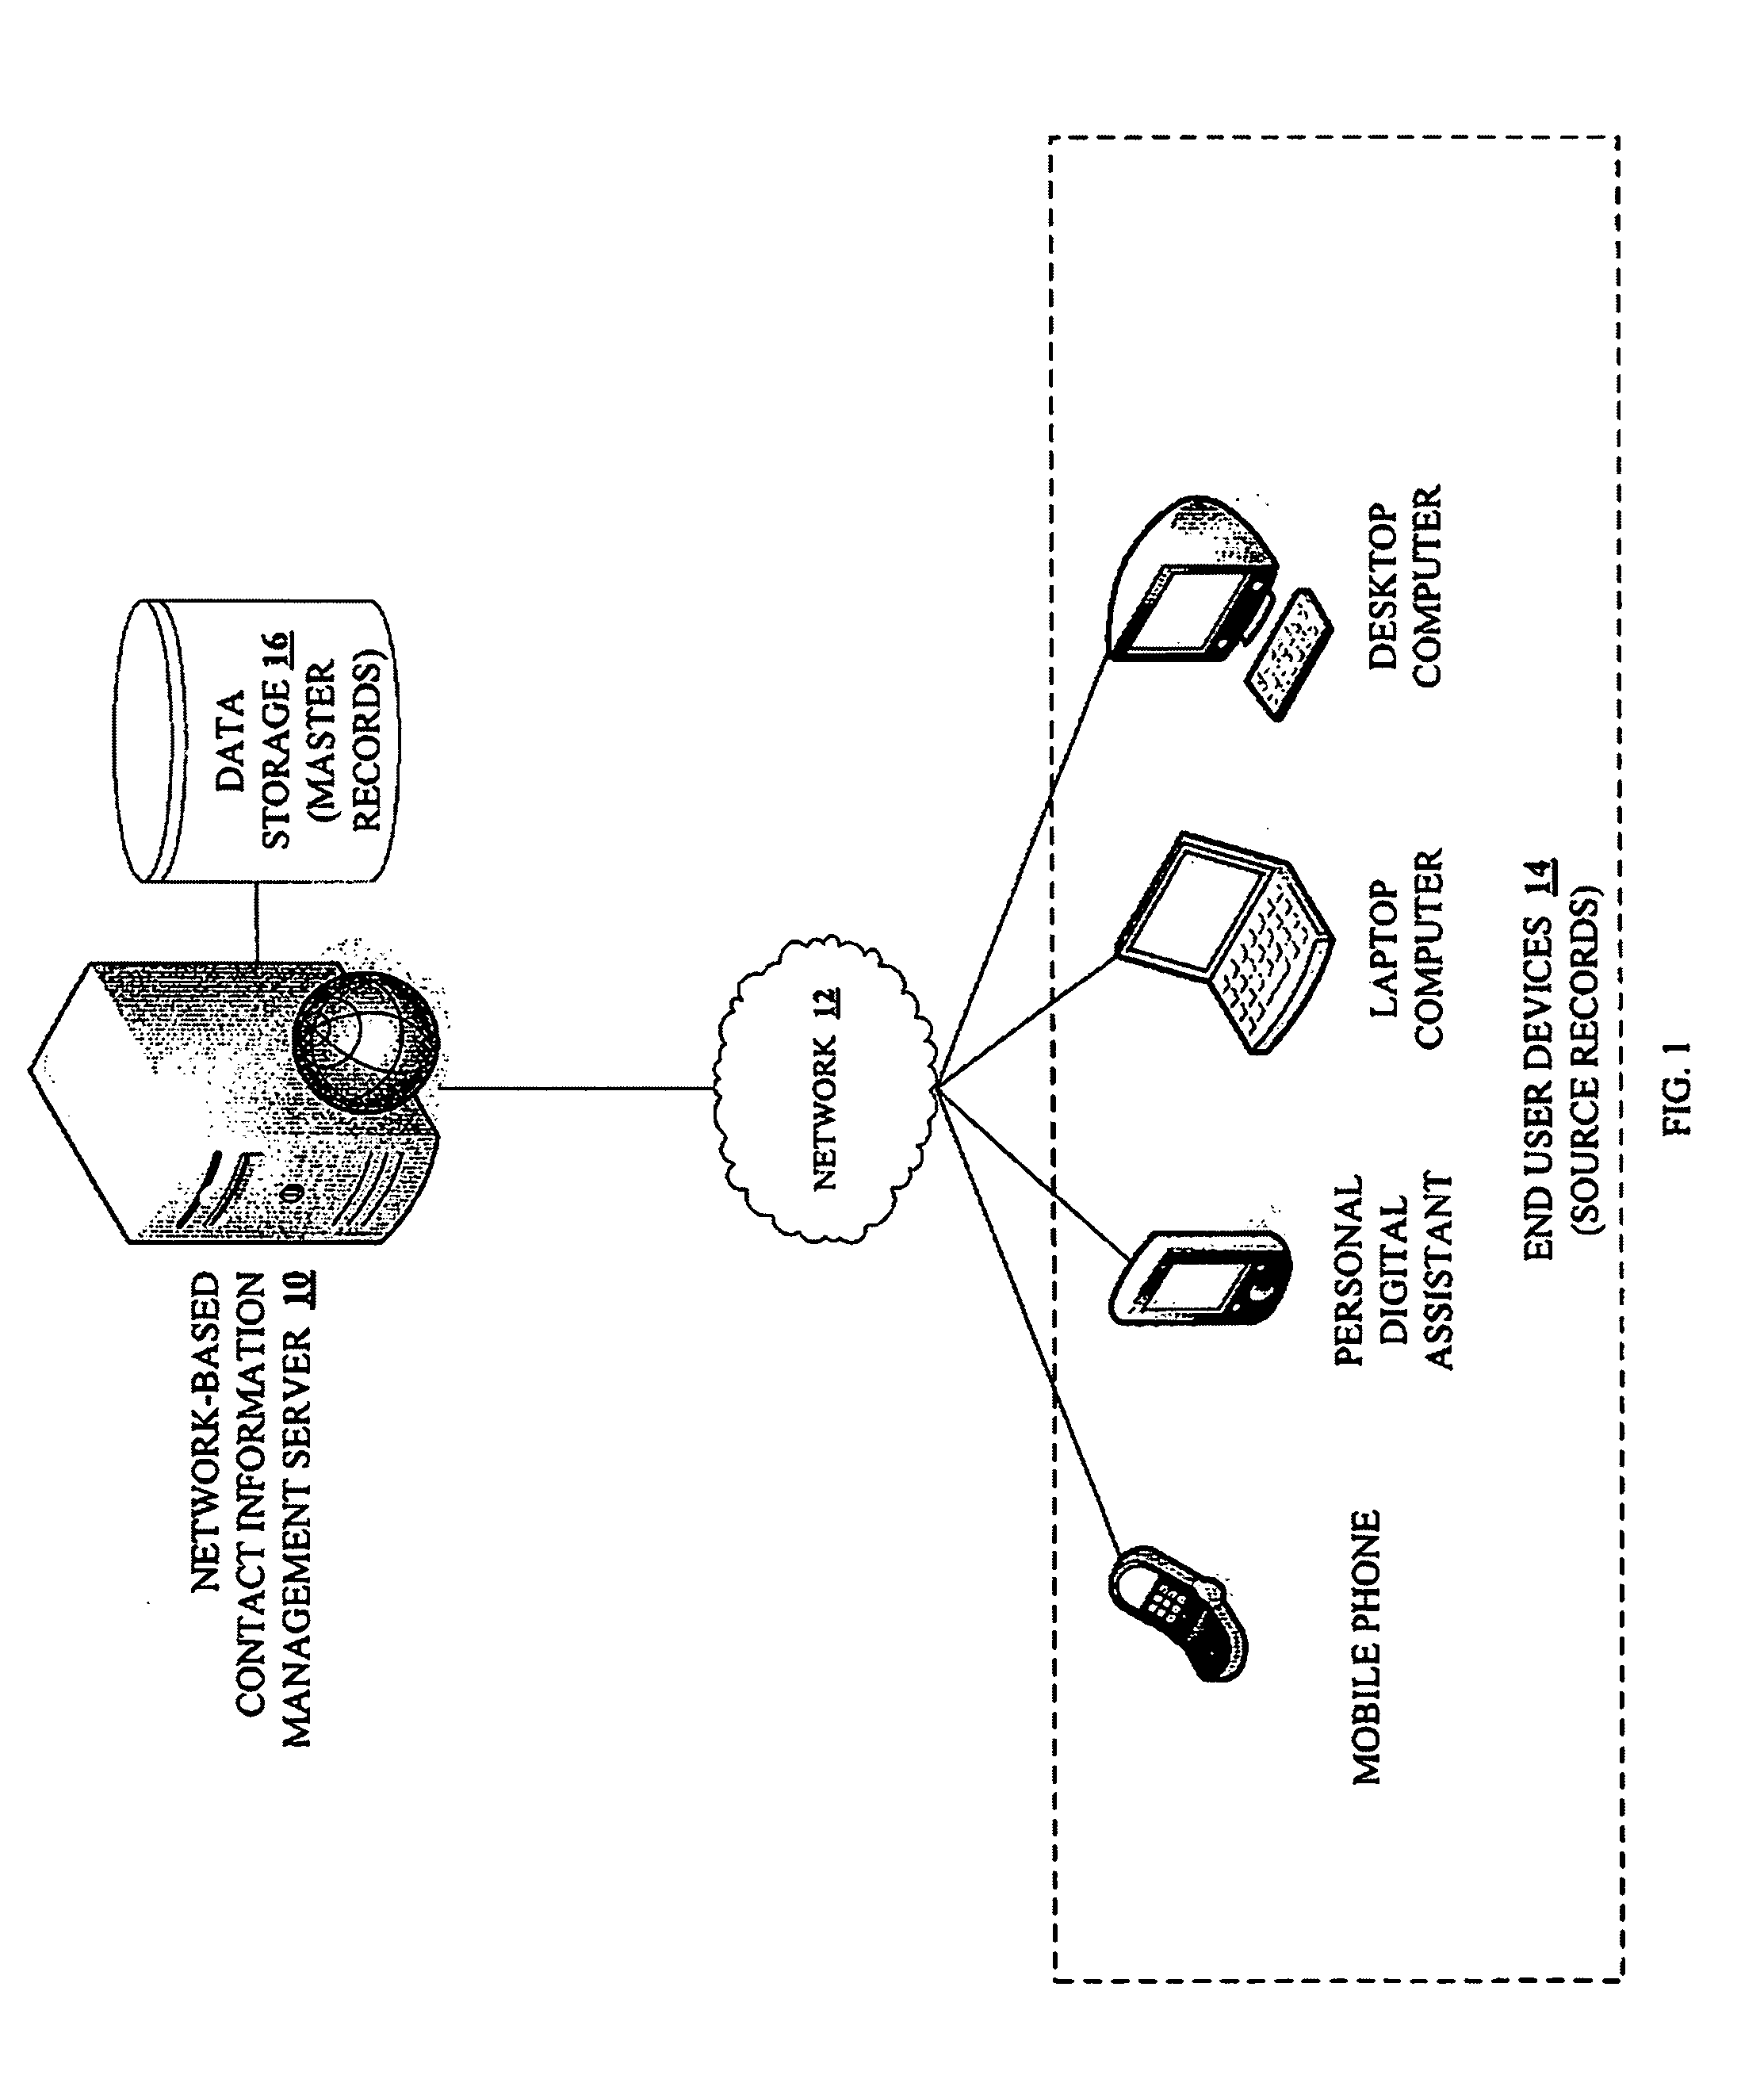 Method and apparatus for identifying and resolving conflicting data records